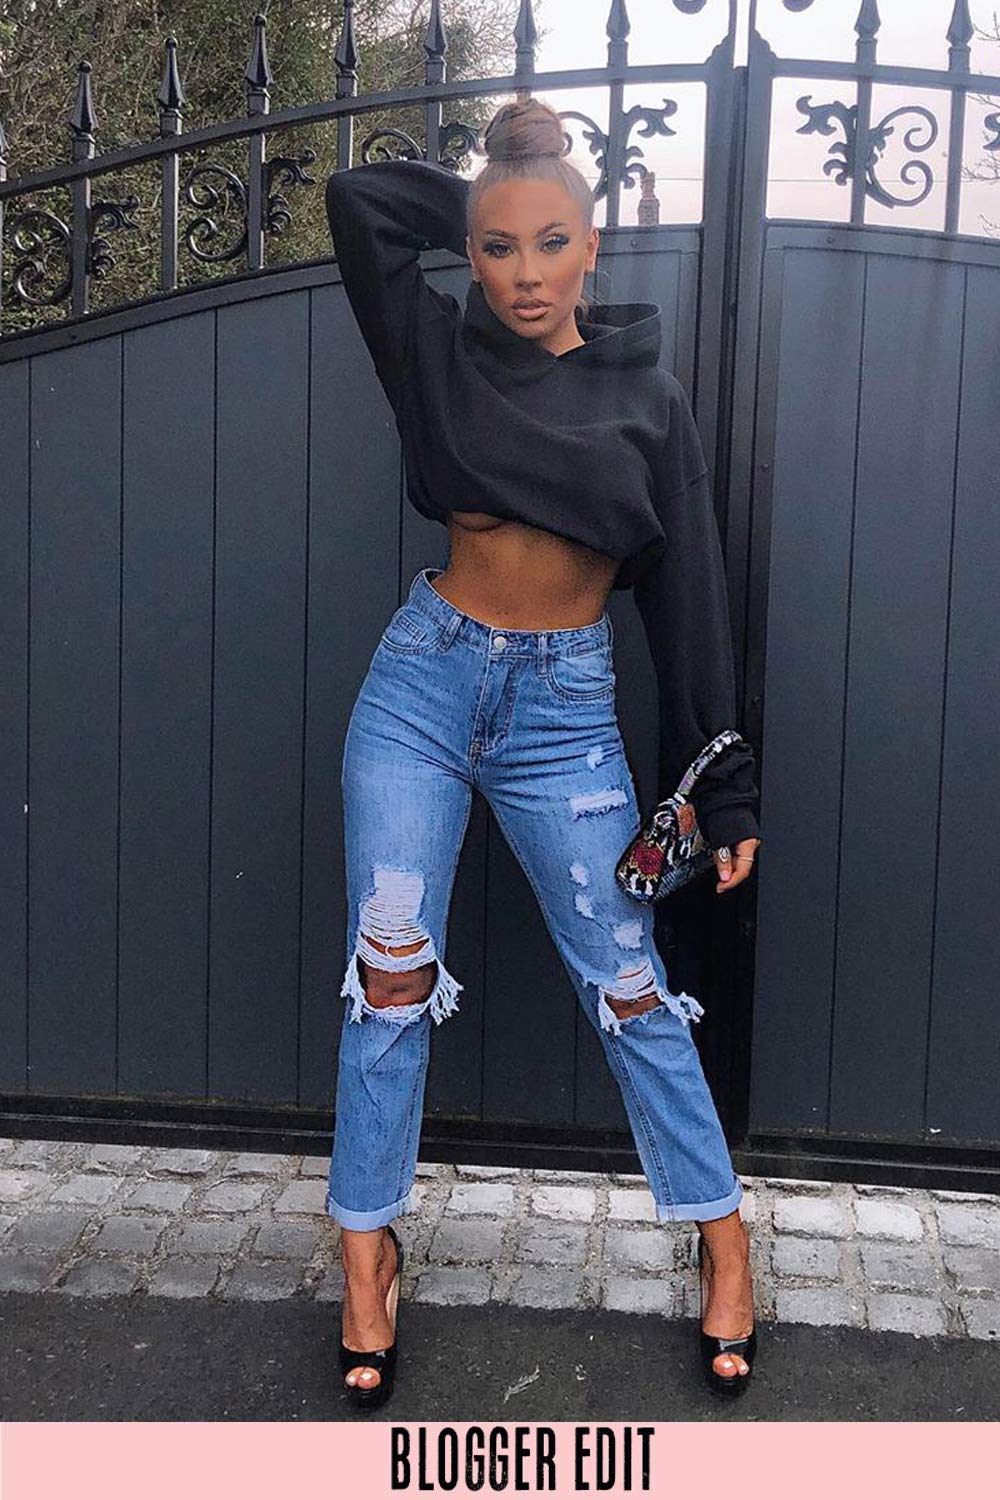 20 Chic Jeans-and-Heels Outfits to Wear in 2023 | Who What Wear